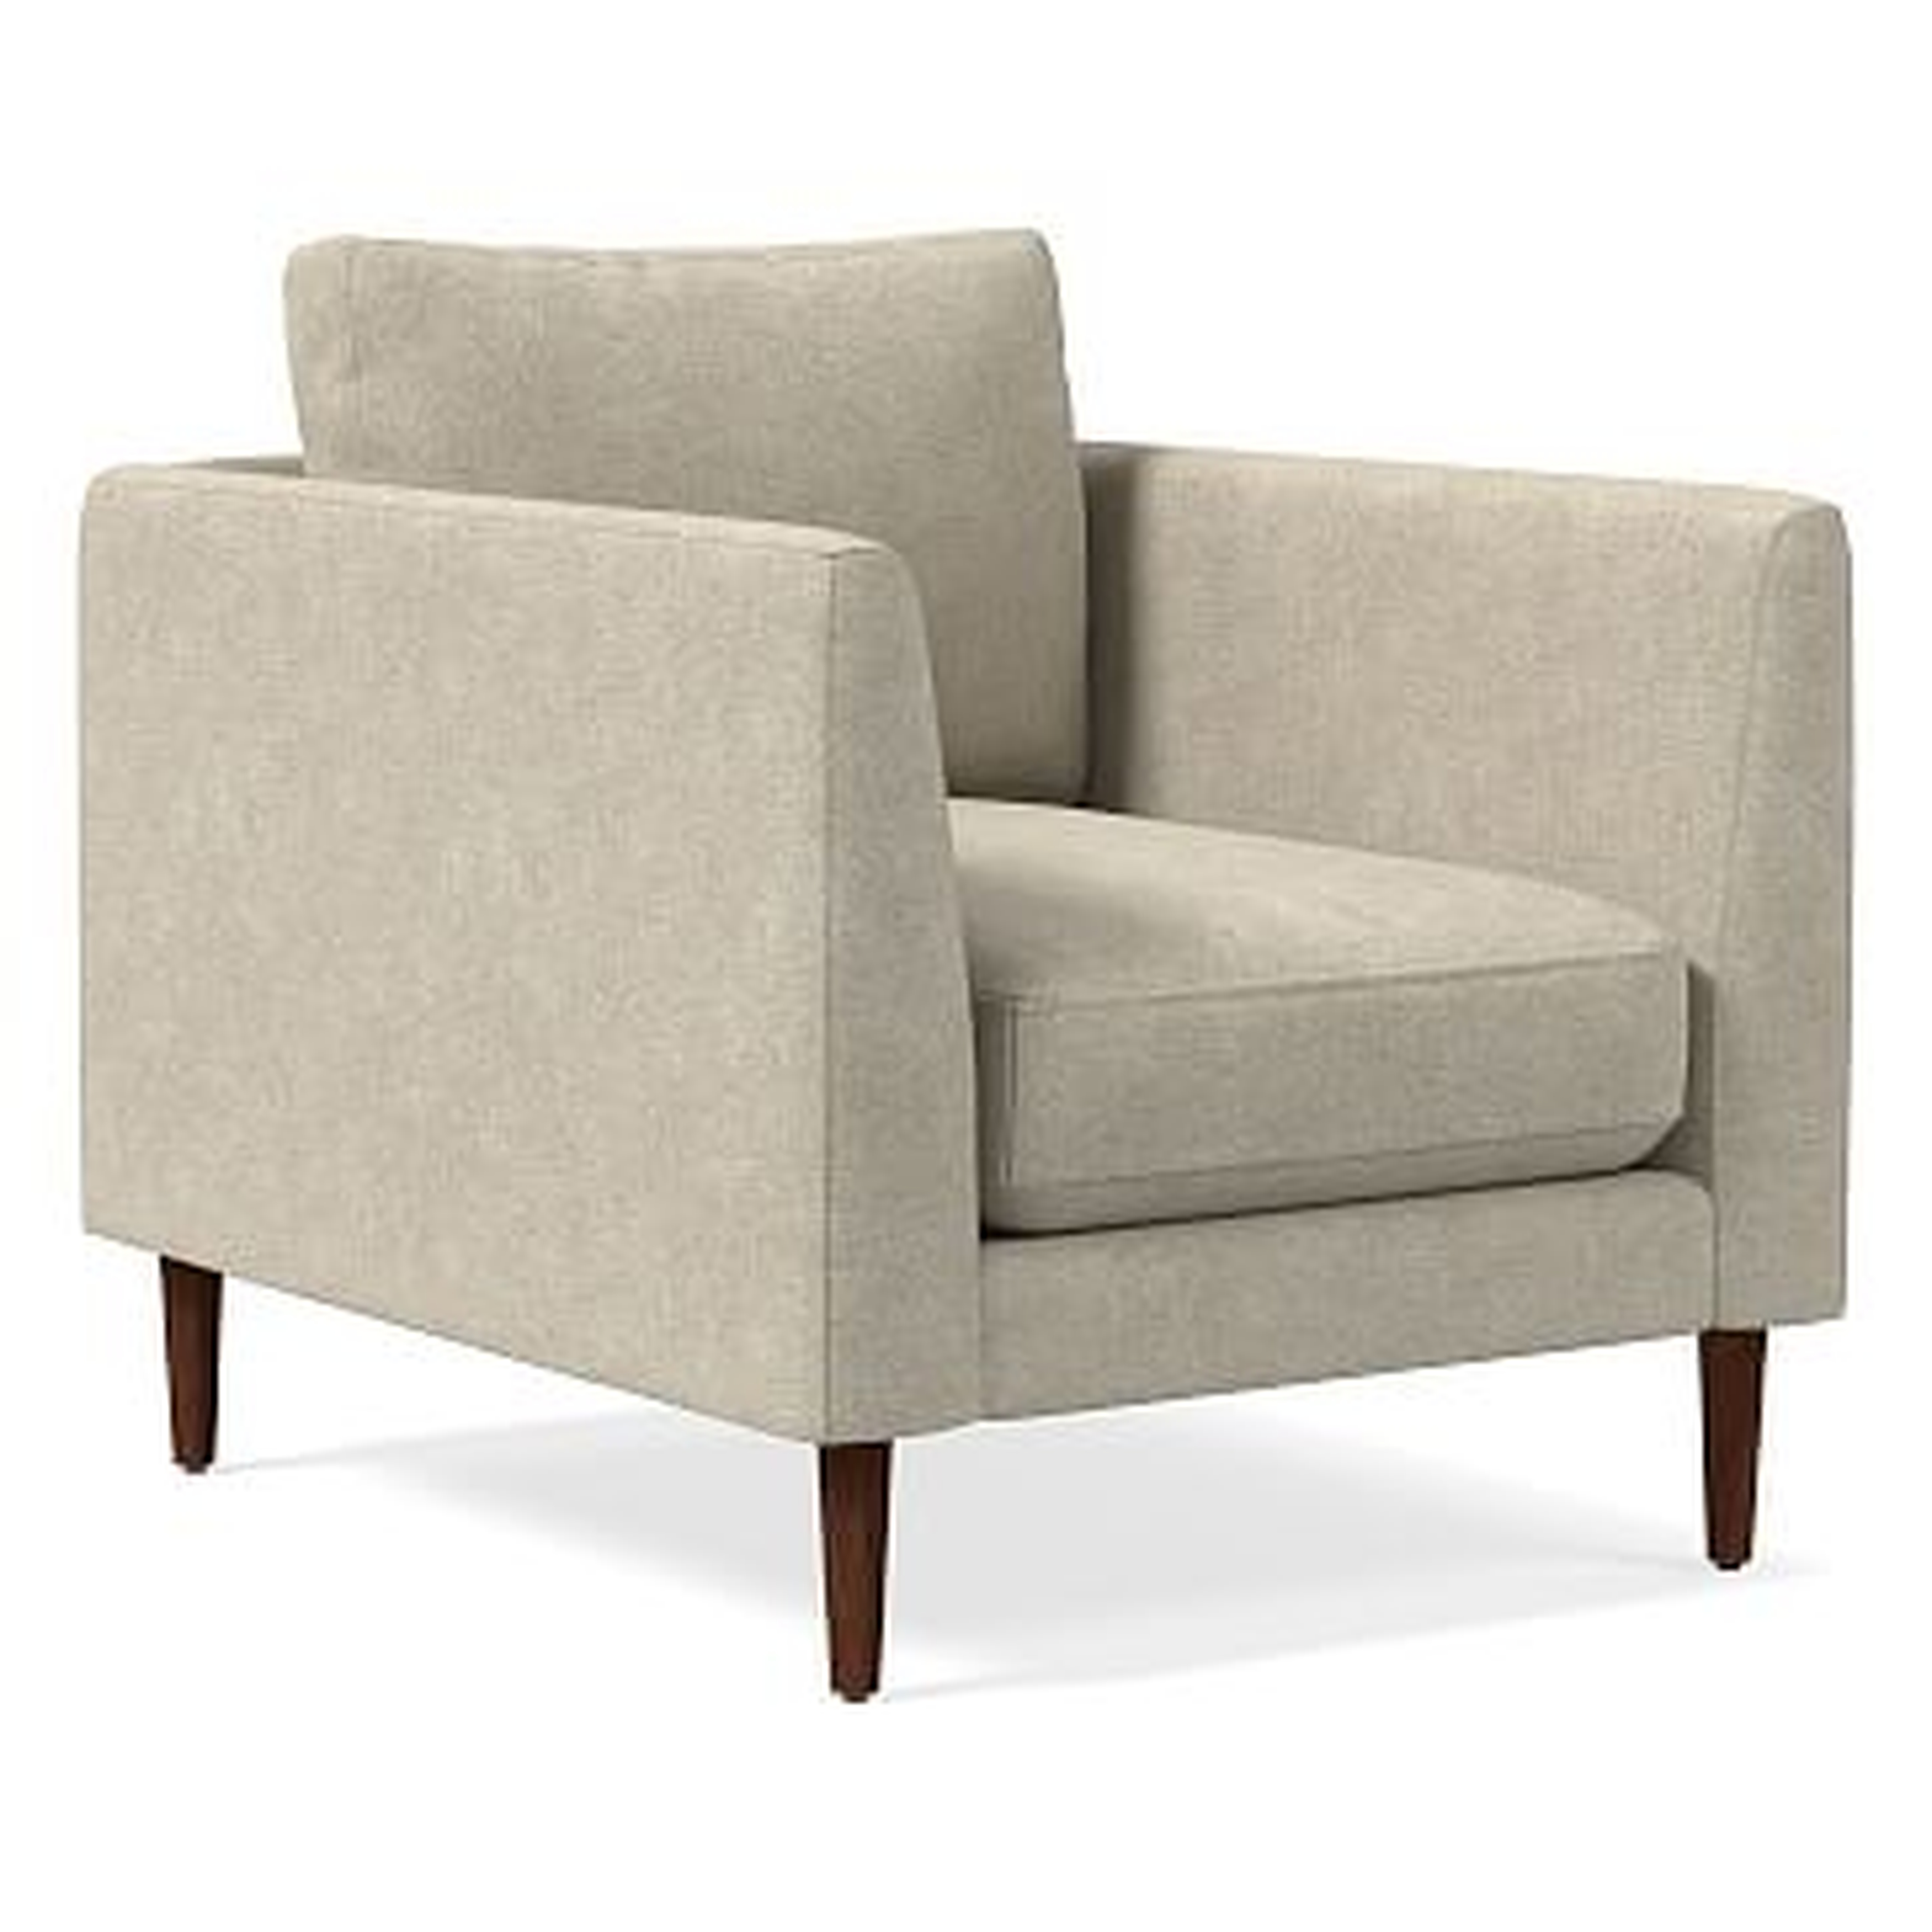 Vail Angled Arm Chair, Poly , Distressed Velvet, Dune, Walnut - West Elm